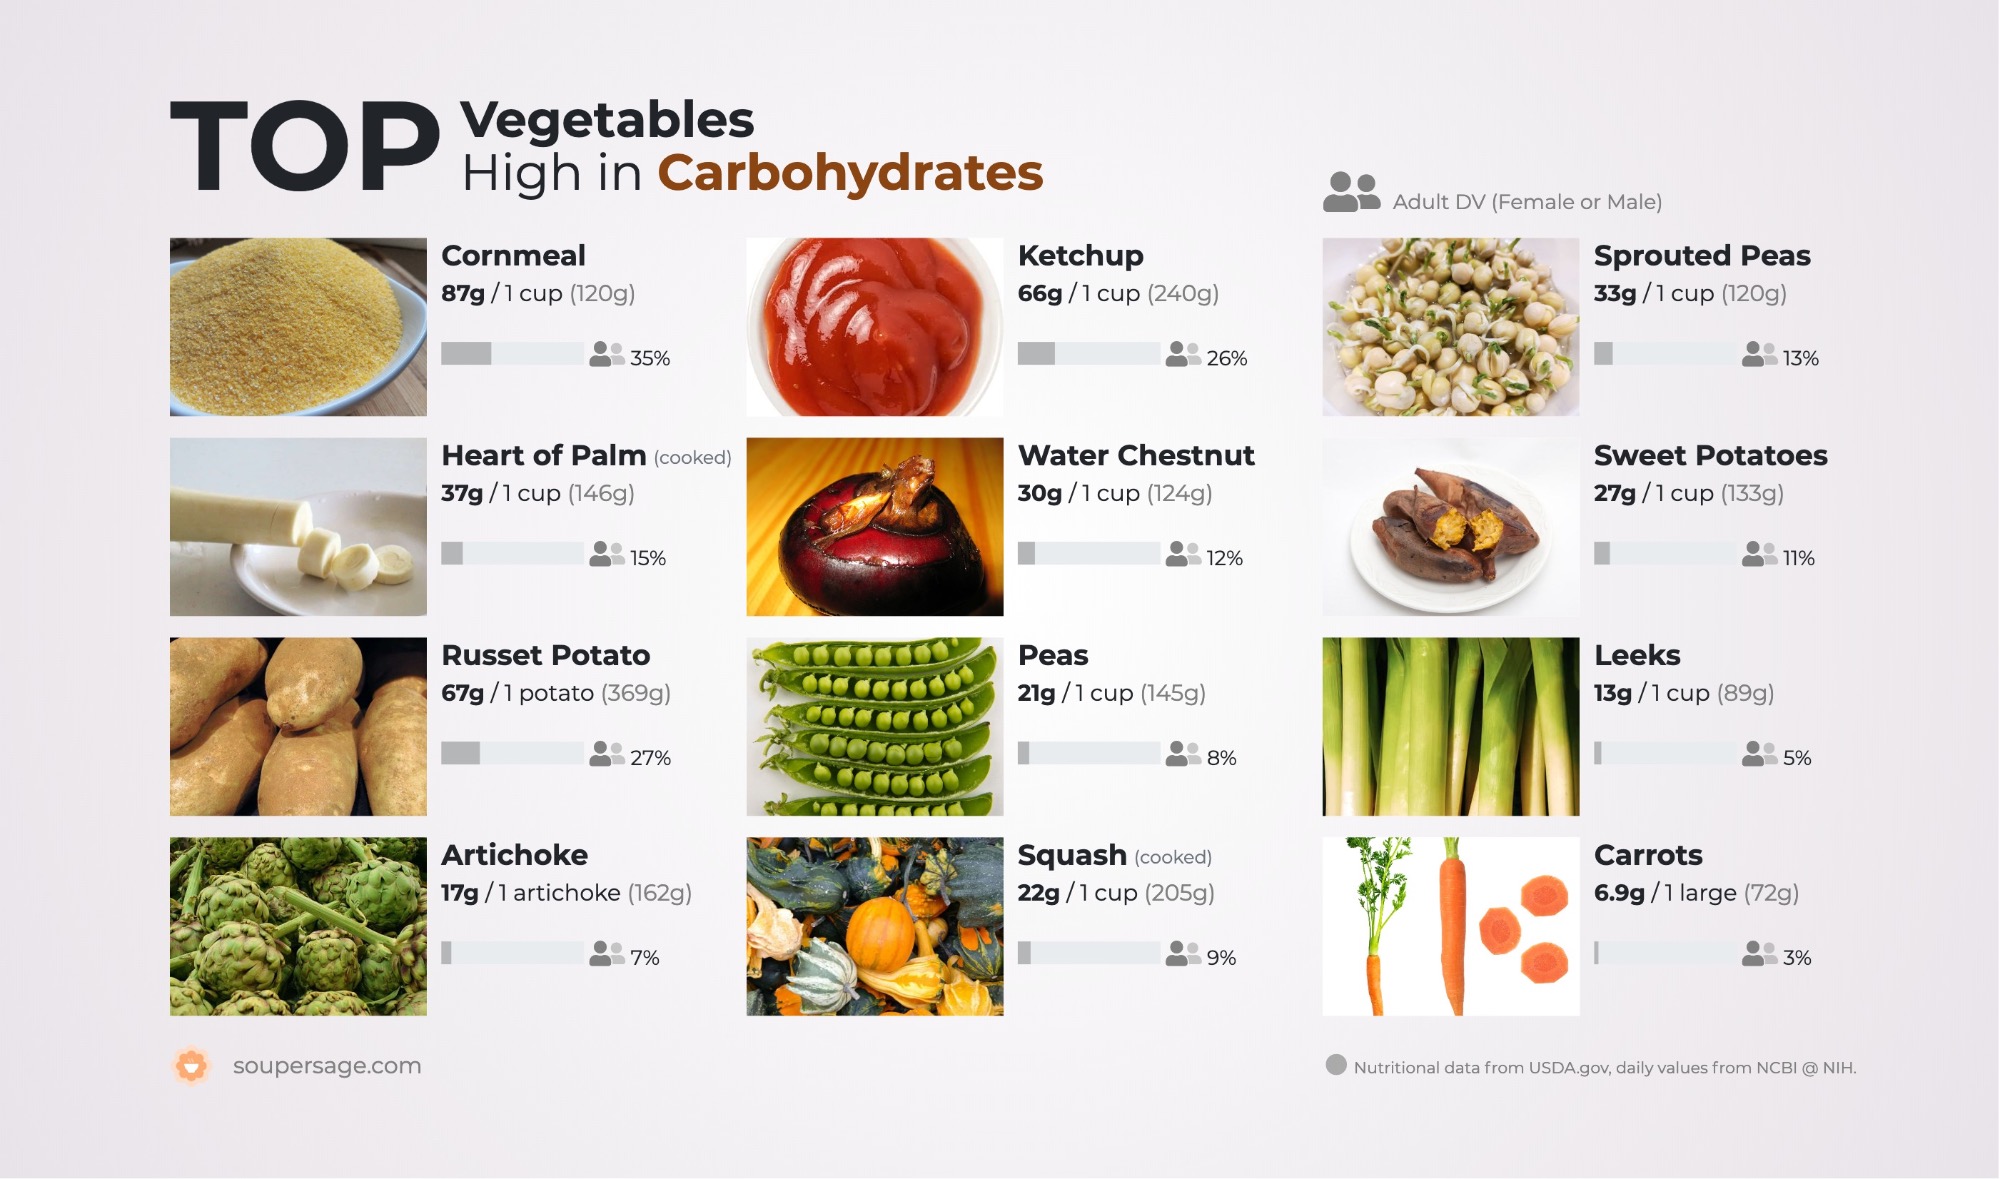 image of Top Vegetables High in Carbohydrates